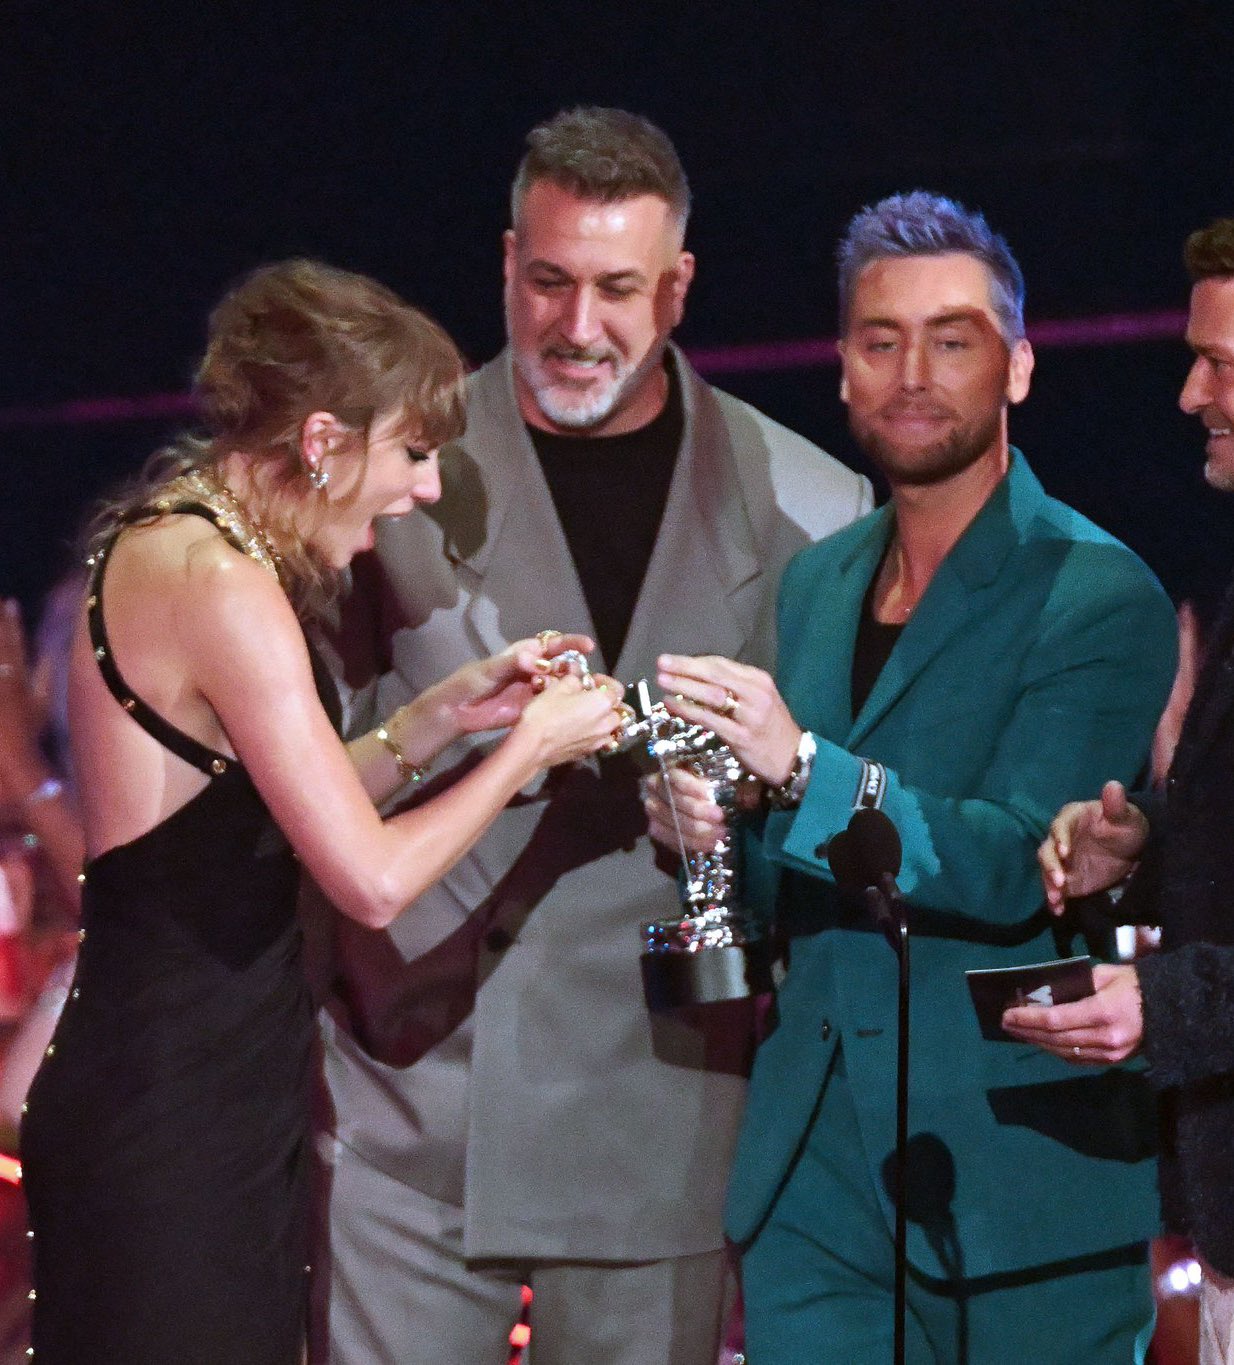 NSync gifted Taylor Swift these adorable friendship bracelets